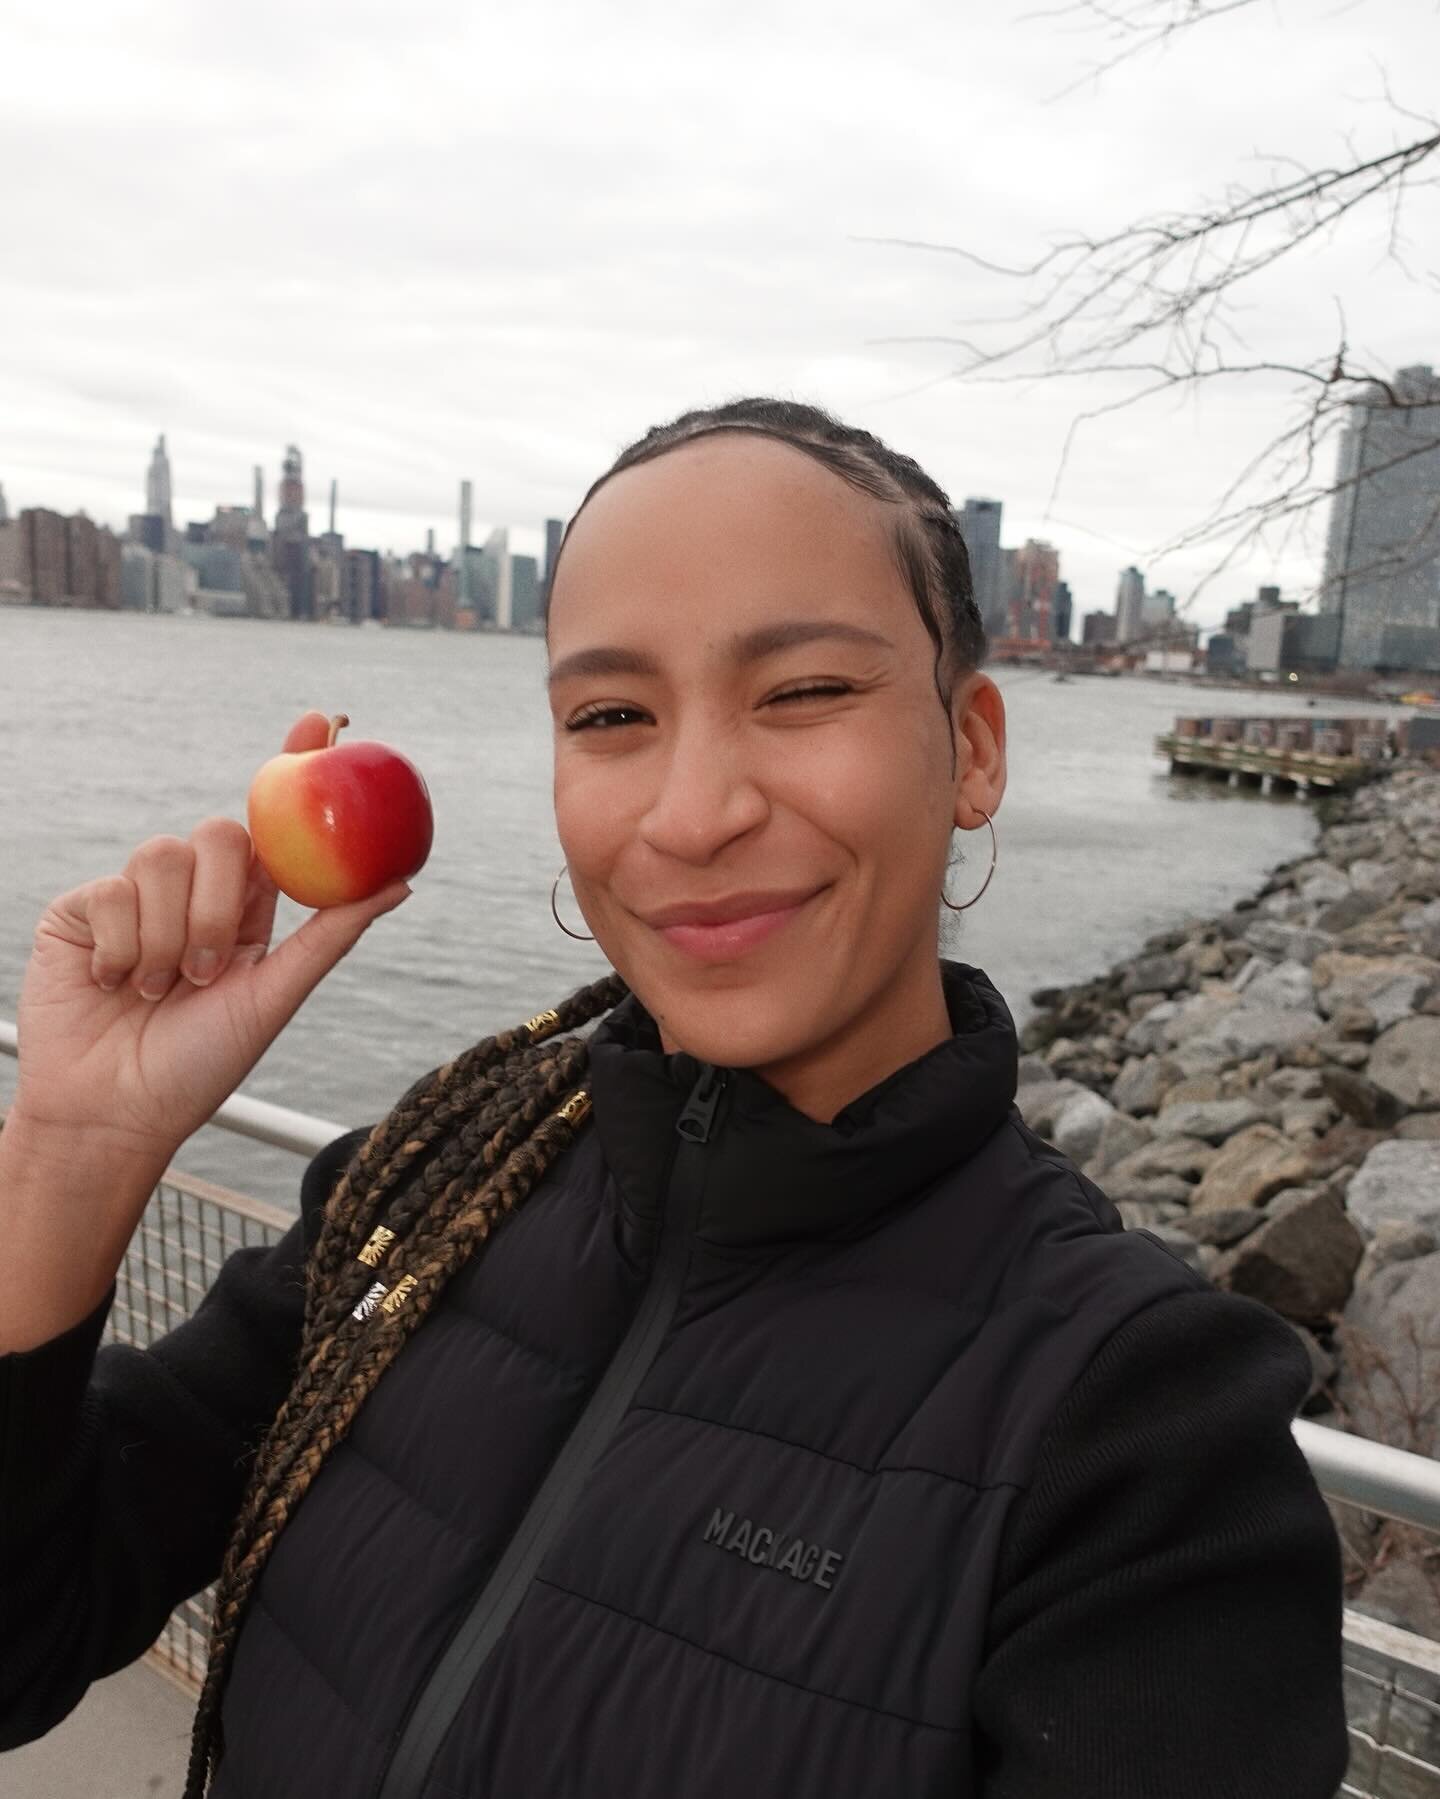 Come with me for a busy day on campus 🍎 
1. Snacking on a @rockitappleusa (look how cute and small it is!) while I commute from Brooklyn to campus (it takes an hour 🫠)
2. Our beautiful campus 🫶🏽
3. Working in between class (&amp; eating another @